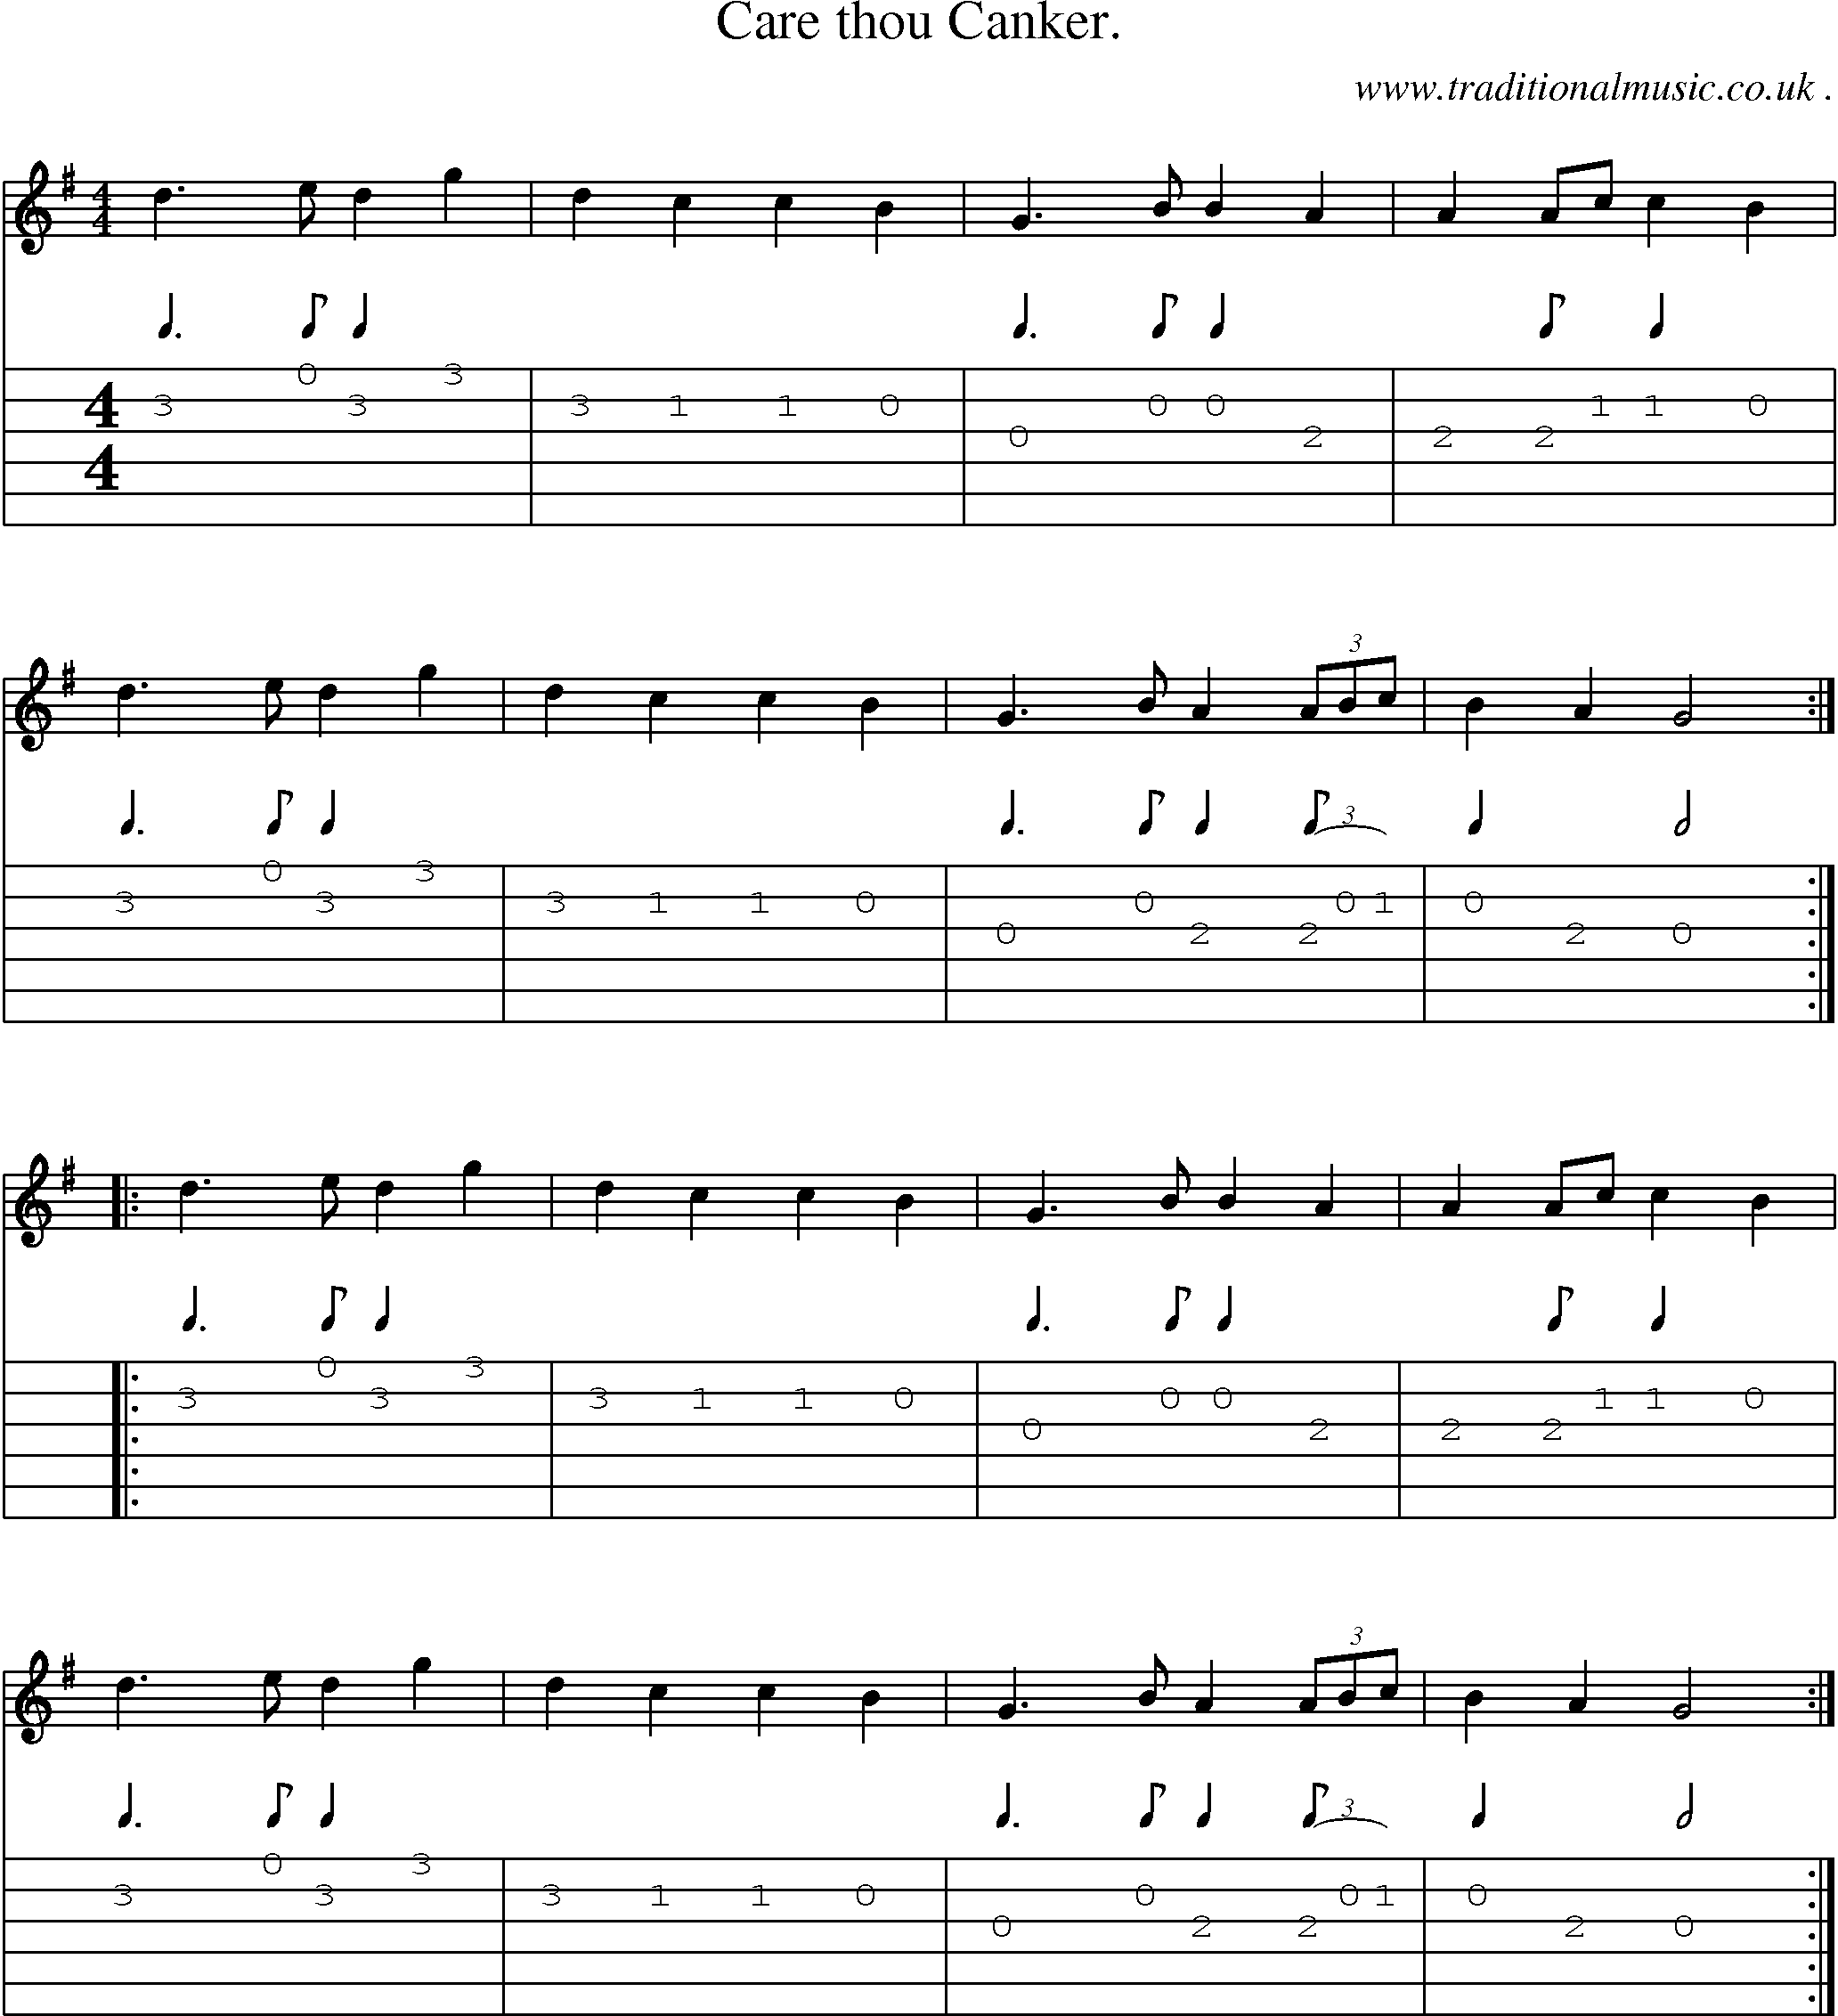 Sheet-Music and Guitar Tabs for Care thou Canker 